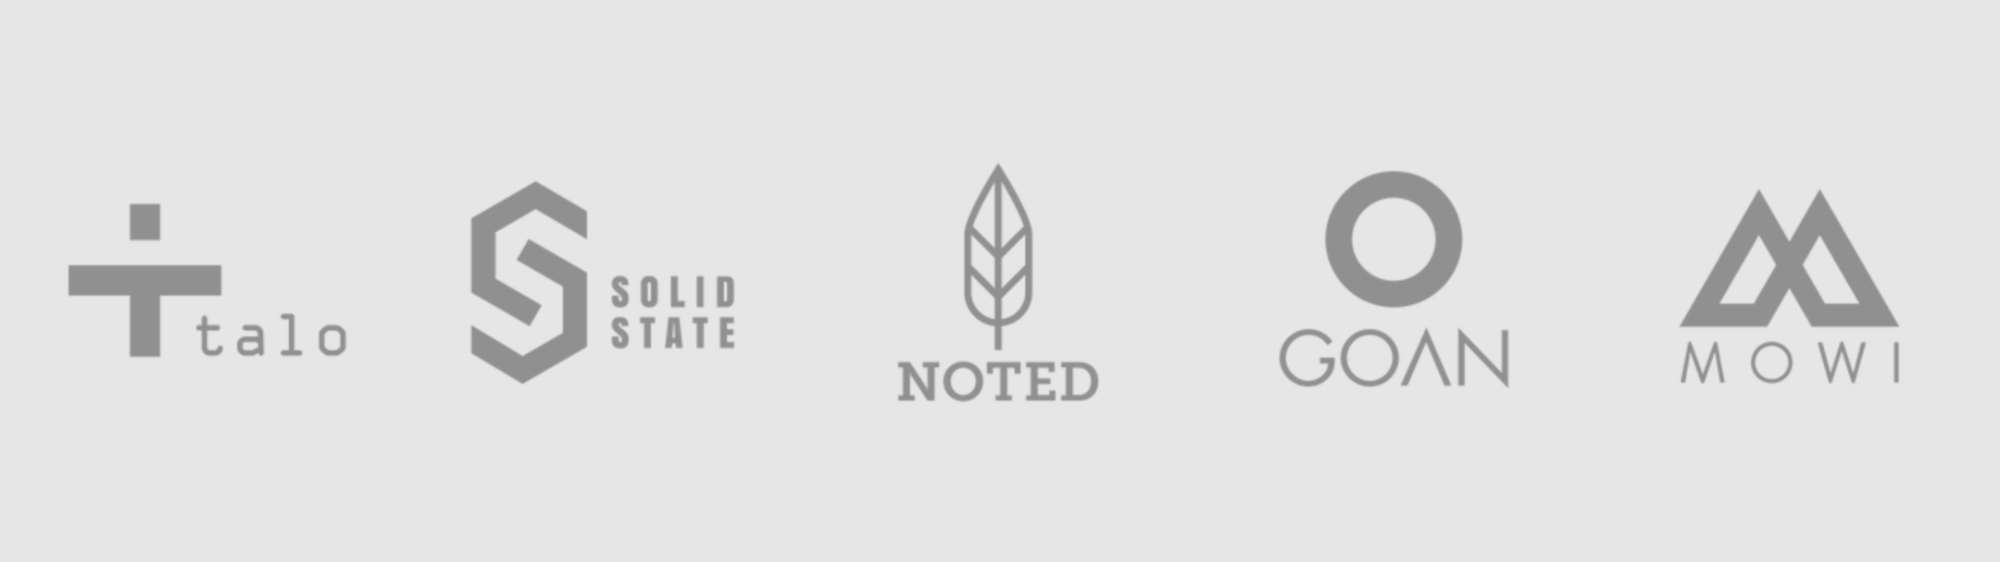 Five partner logos on a grey background: Talo, Solid State, Noted, GOAN, MOWI